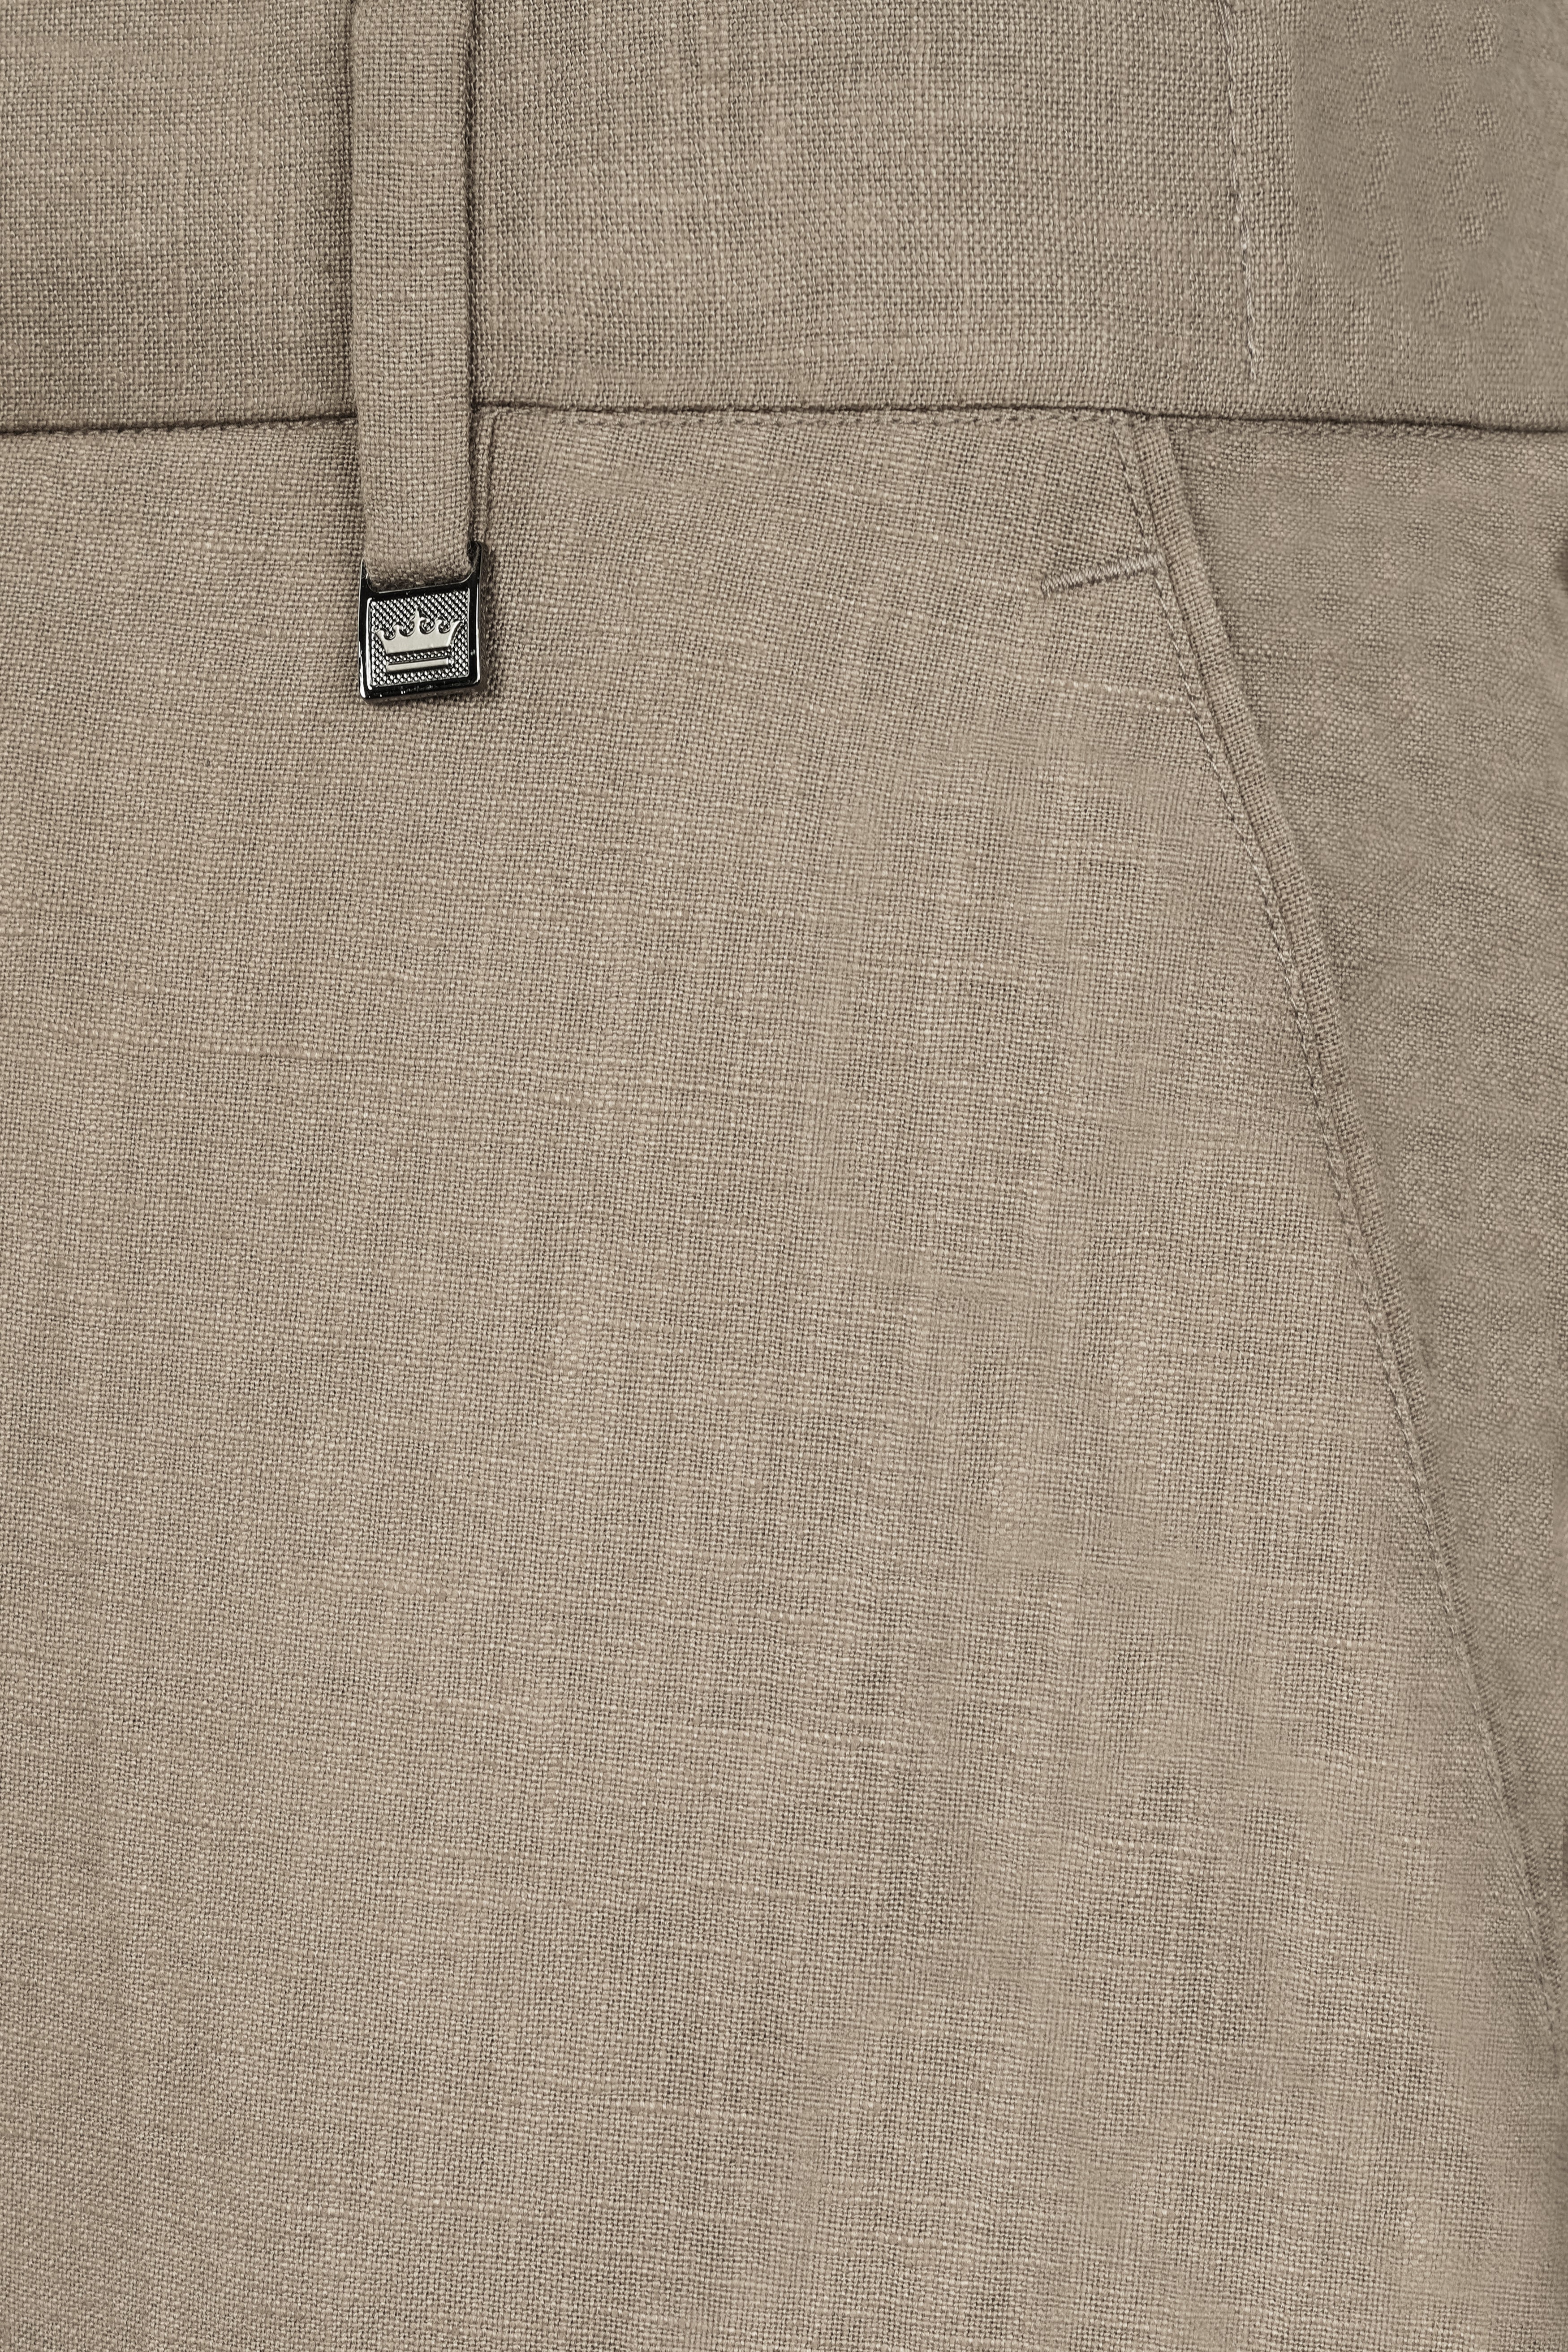 Oyster Brown Luxurious Linen Double Breasted Sports Suit ST3118-DB-PP-36, ST3118-DB-PP-38, ST3118-DB-PP-40, ST3118-DB-PP-42, ST3118-DB-PP-44, ST3118-DB-PP-46, ST3118-DB-PP-48, ST3118-DB-PP-50, ST3118-DB-PP-52, ST3118-DB-PP-54, ST3118-DB-PP-56, ST3118-DB-PP-58, ST3118-DB-PP-60